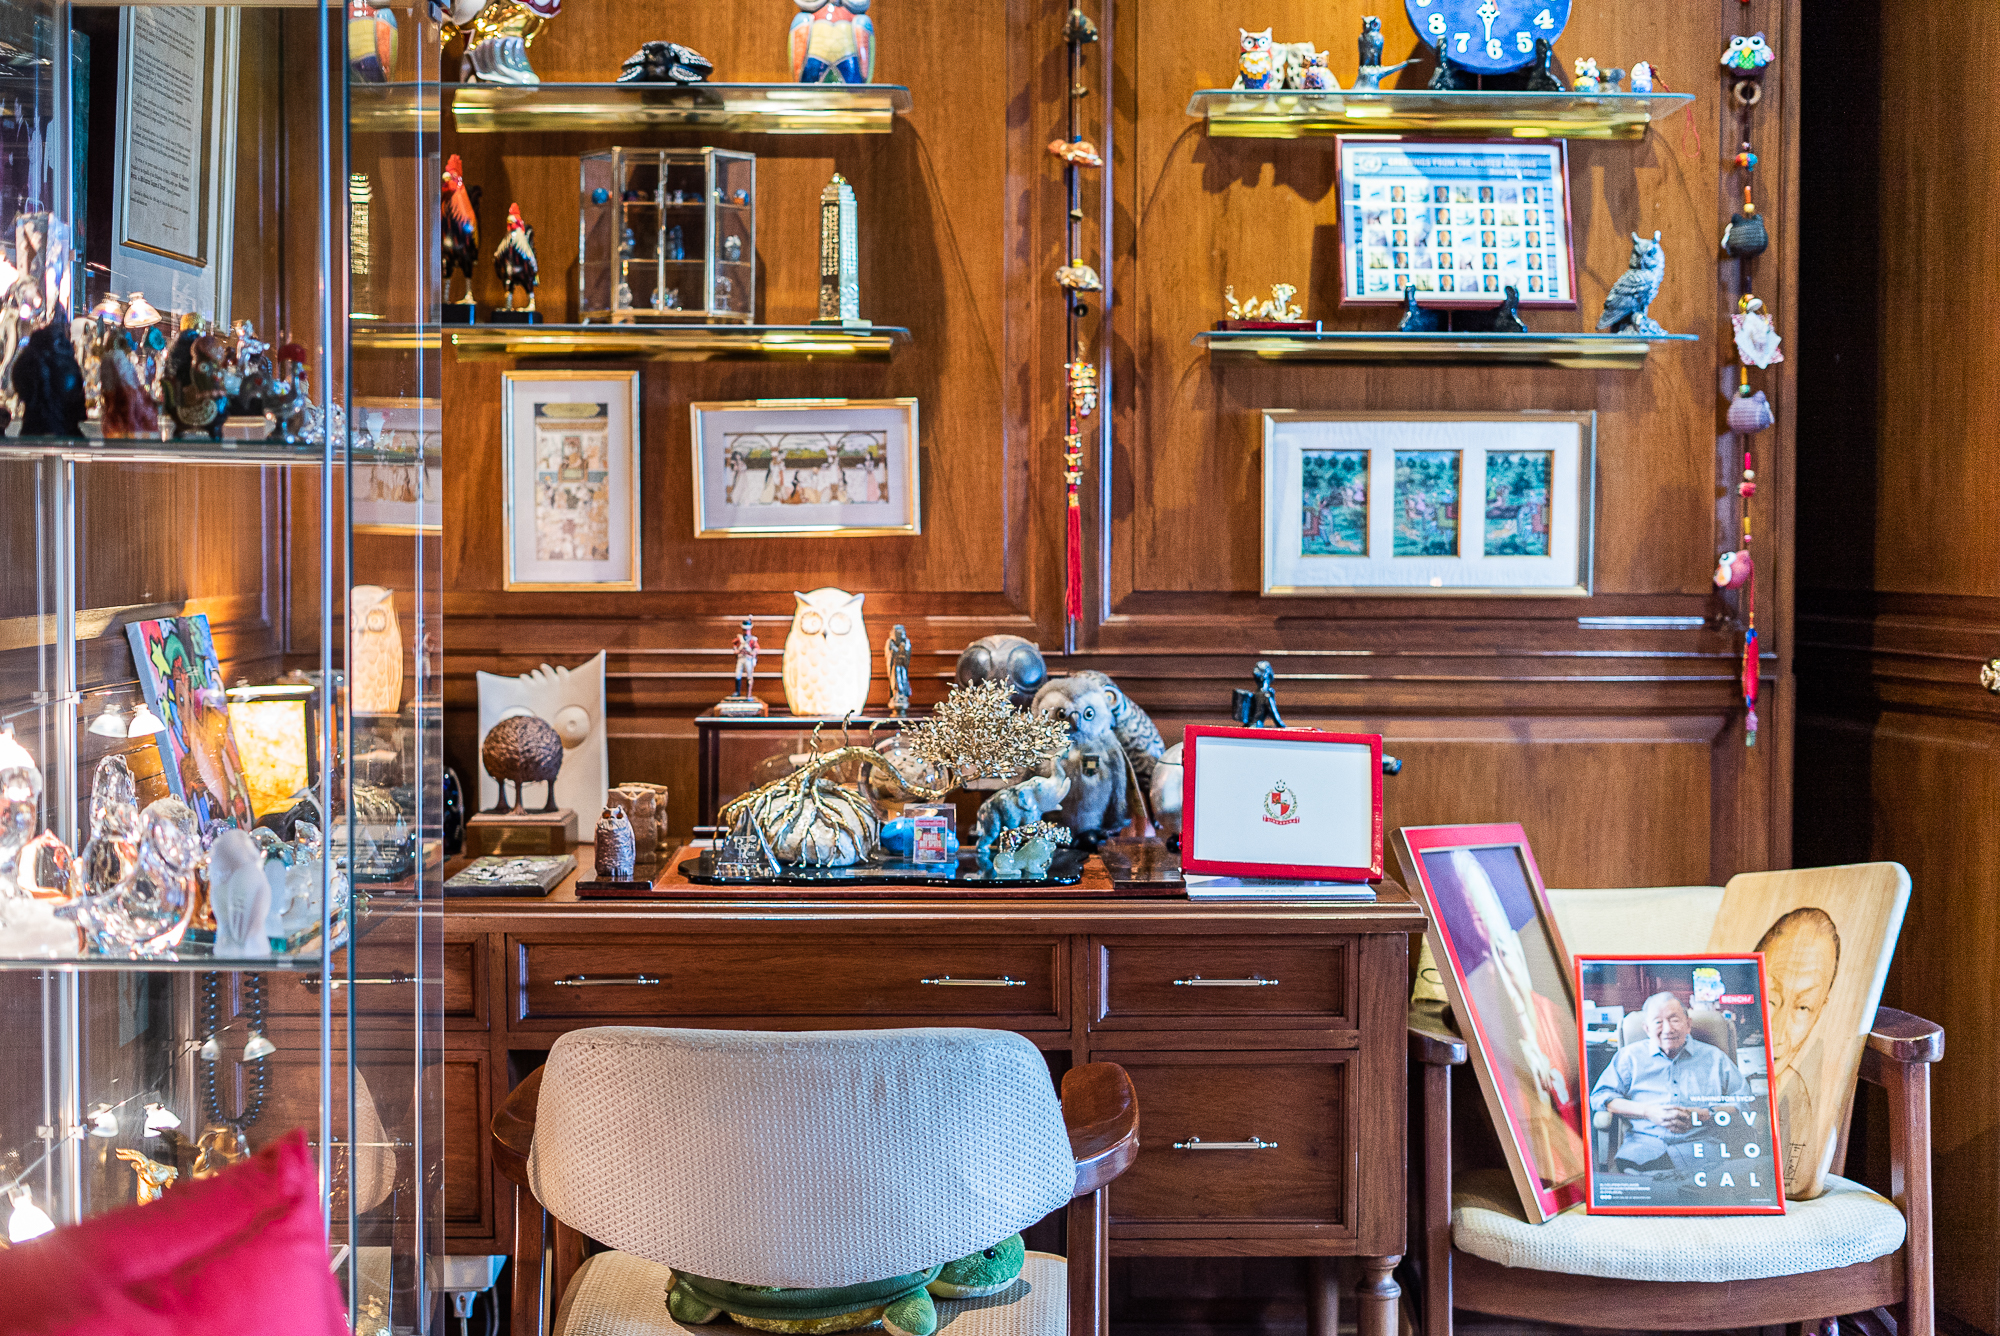 This desk was hardly ever used as one. It became another table to hold more photos and knickknacks. The glass case was a gift from an artist friend who wanted to organize this corner of his office.